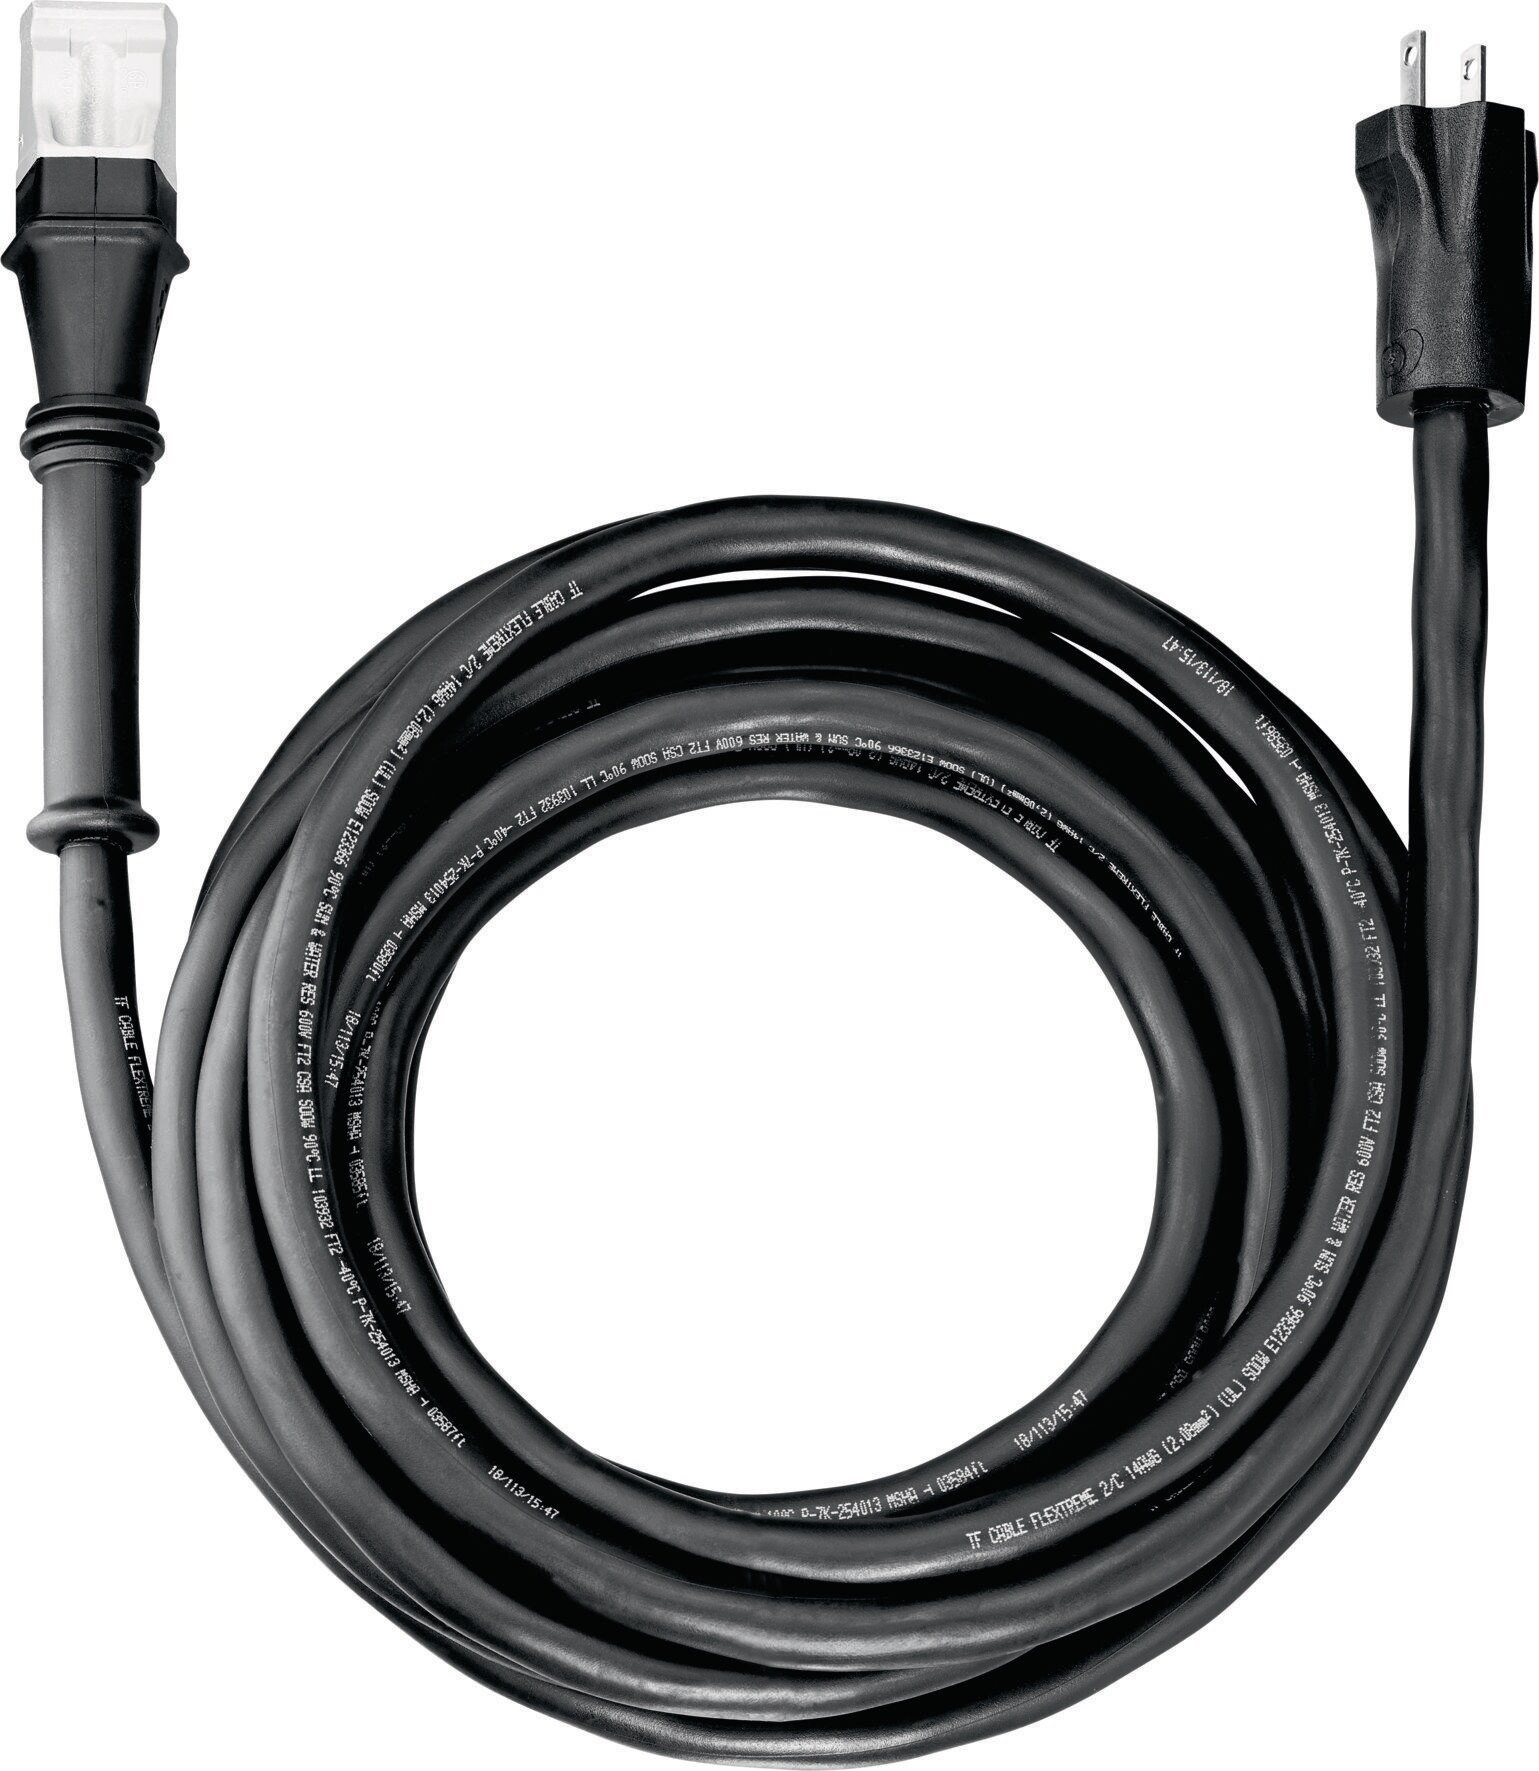 Hilti 8ft Replacement Cord for Te 74 Te 75 Te 76 Fast for sale online 